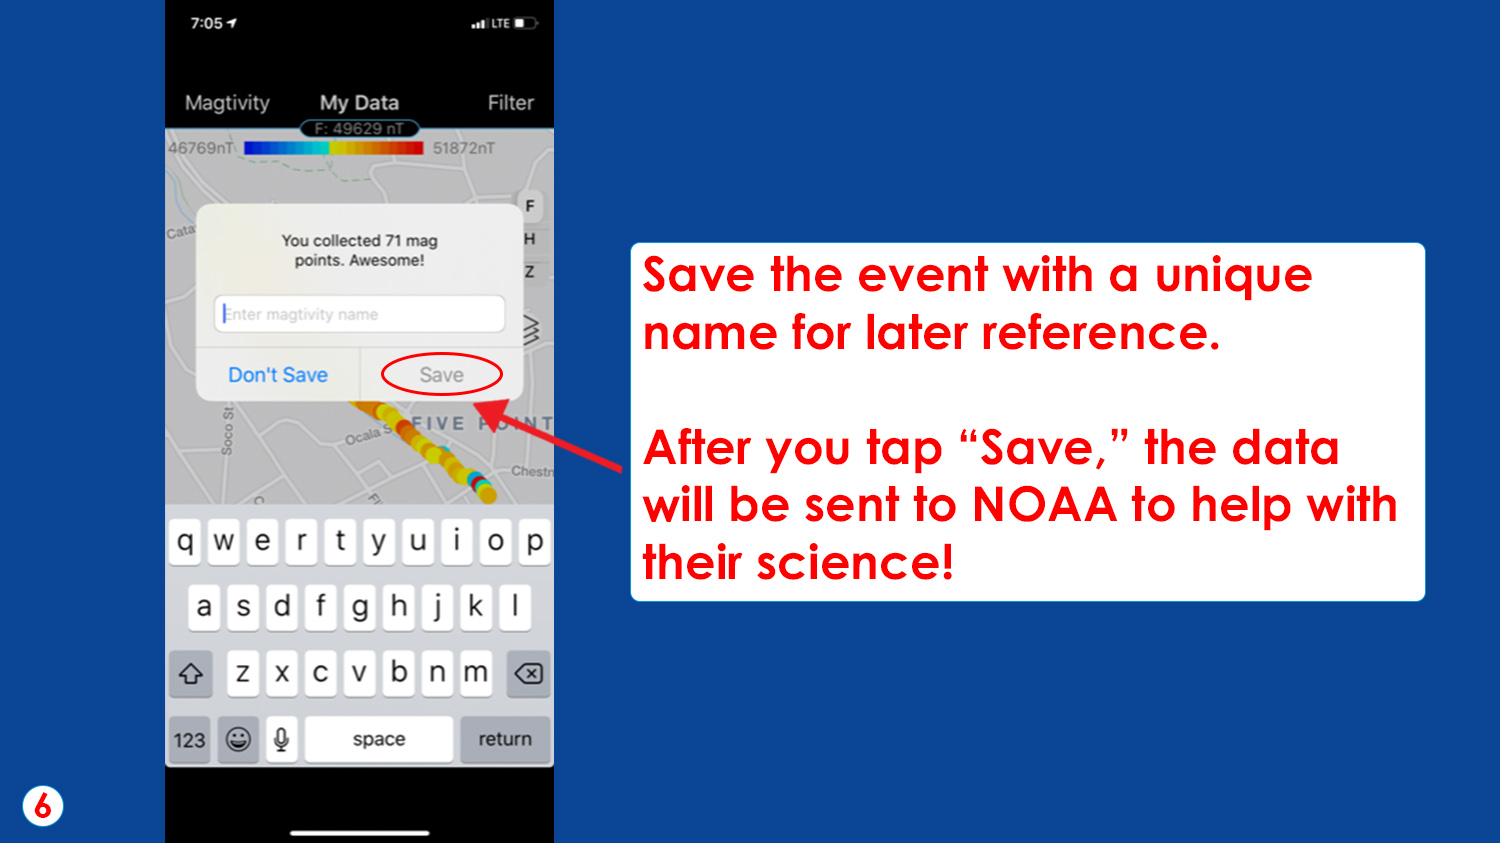 Save the event with a unique name for later reference. 

After you tap “Save,” the data will be sent to NOAA to help with their science!